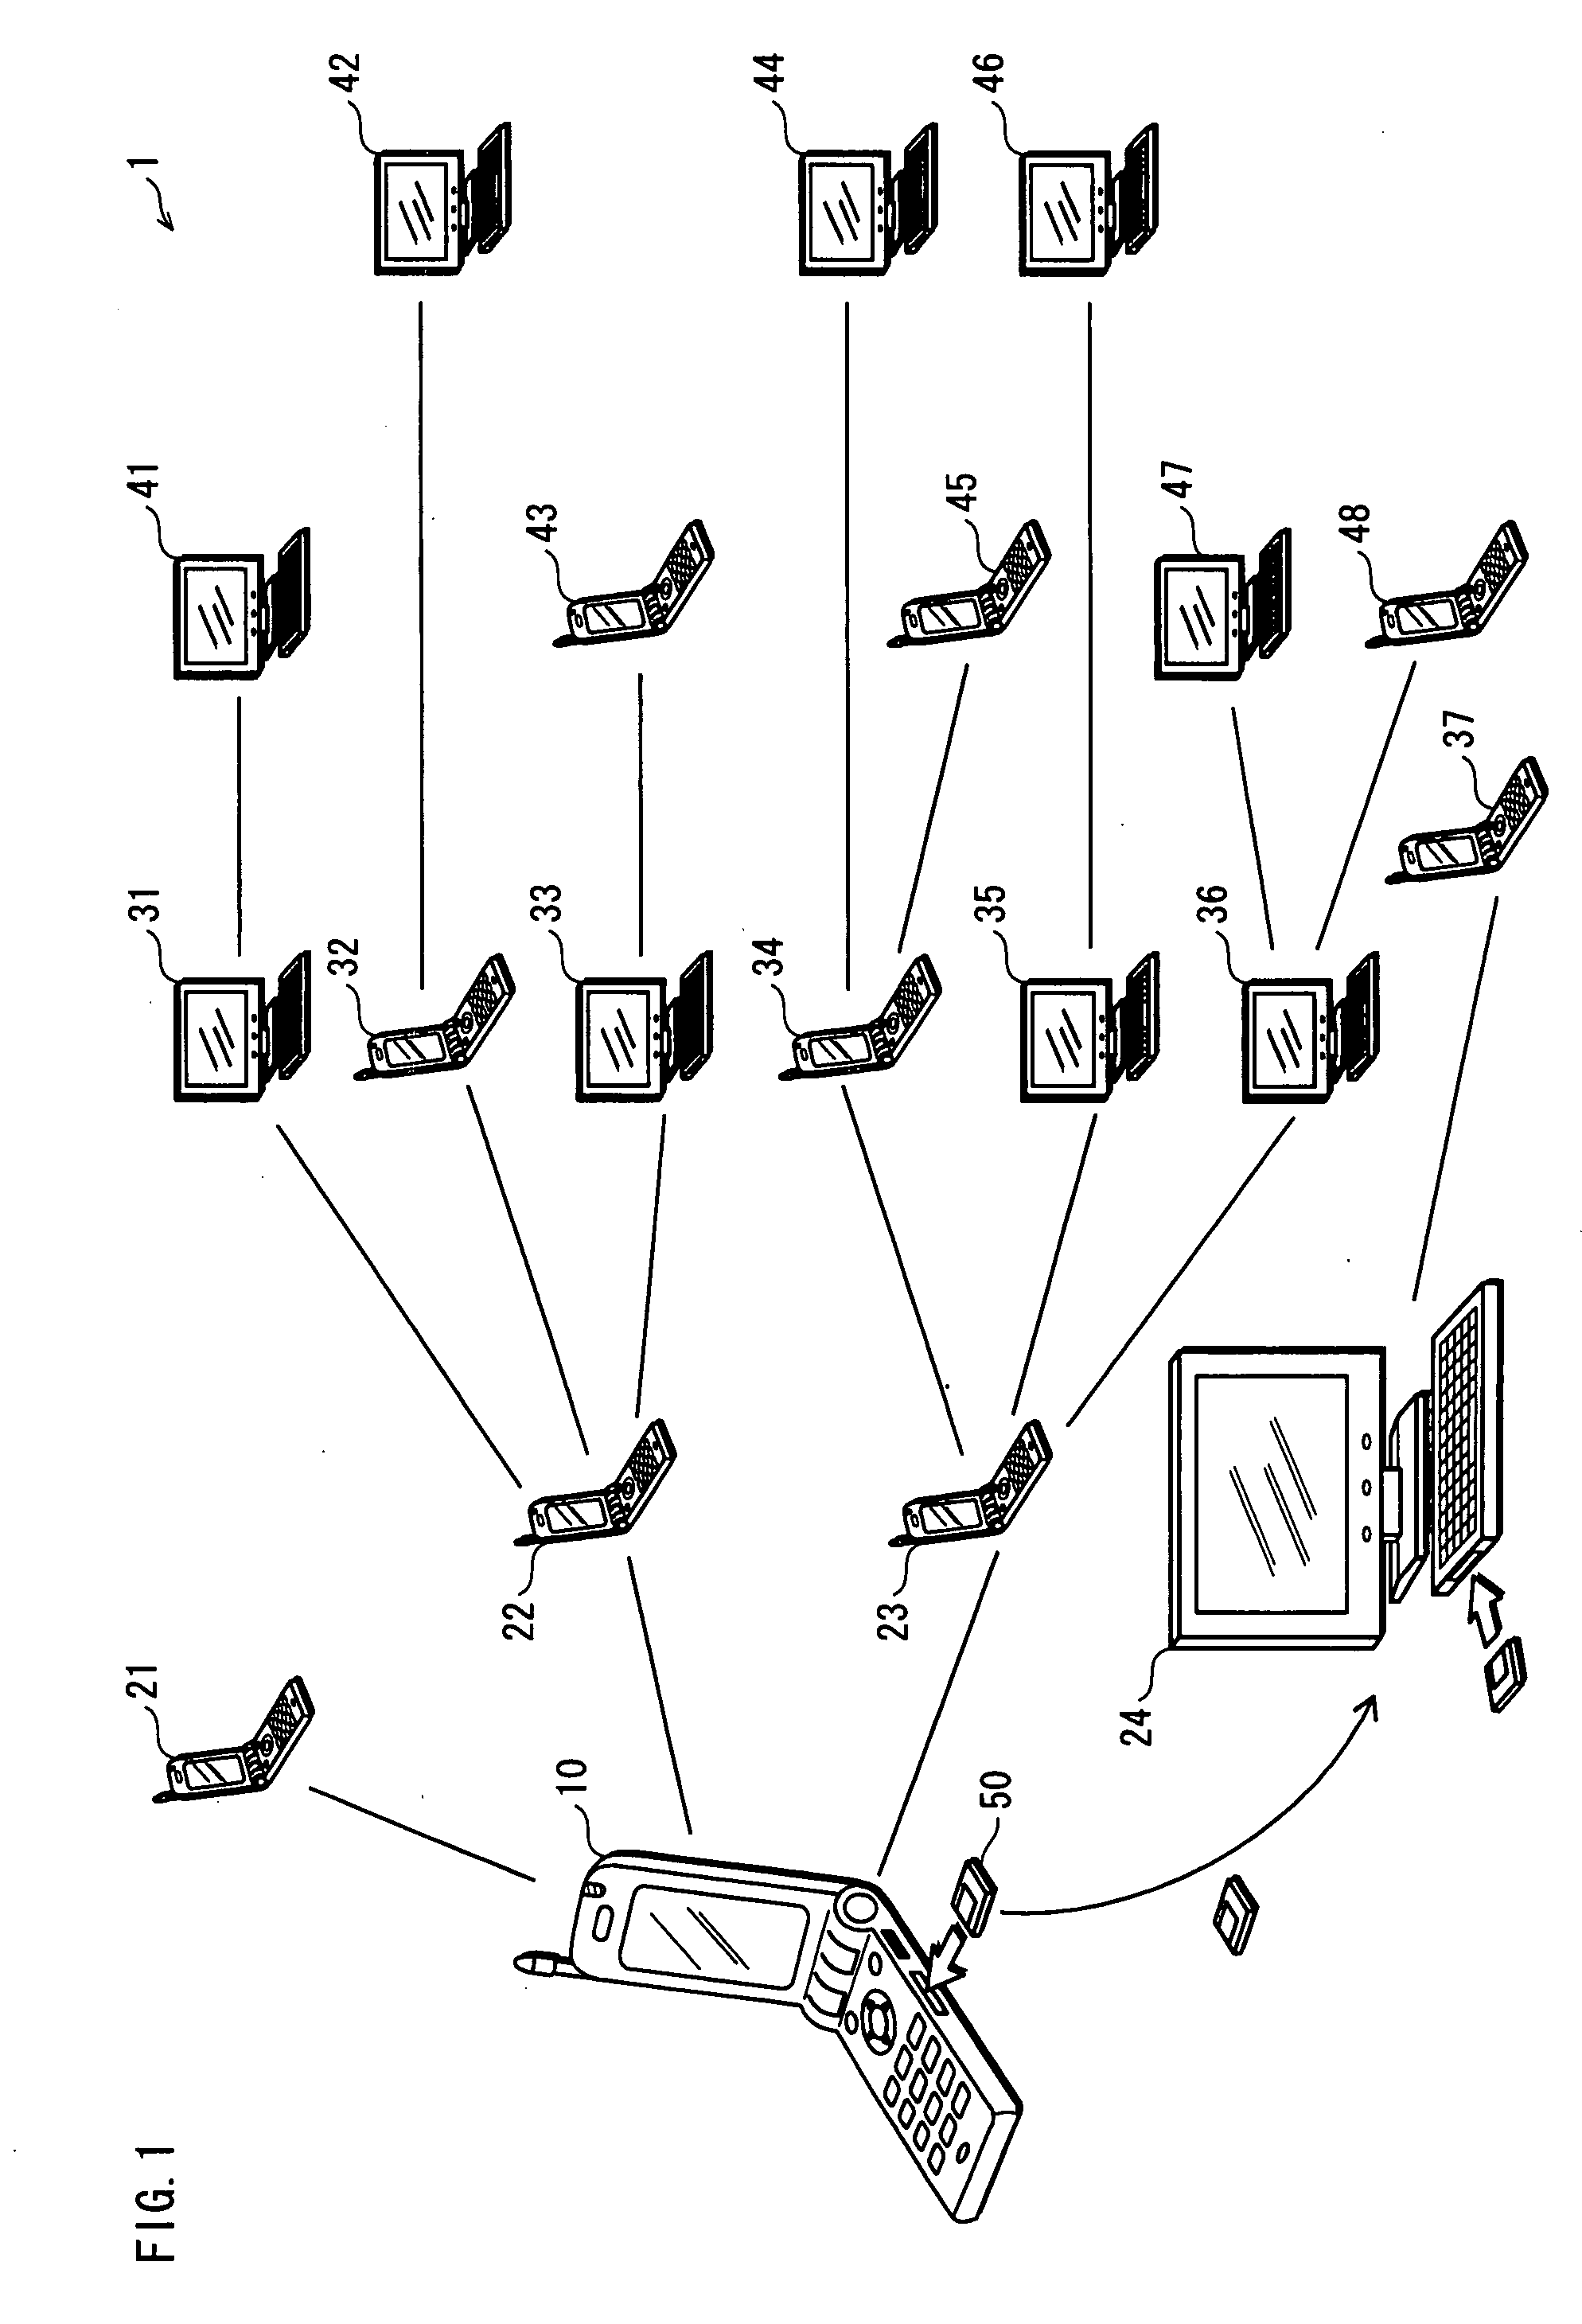 Information Distribution System and Terminal Device